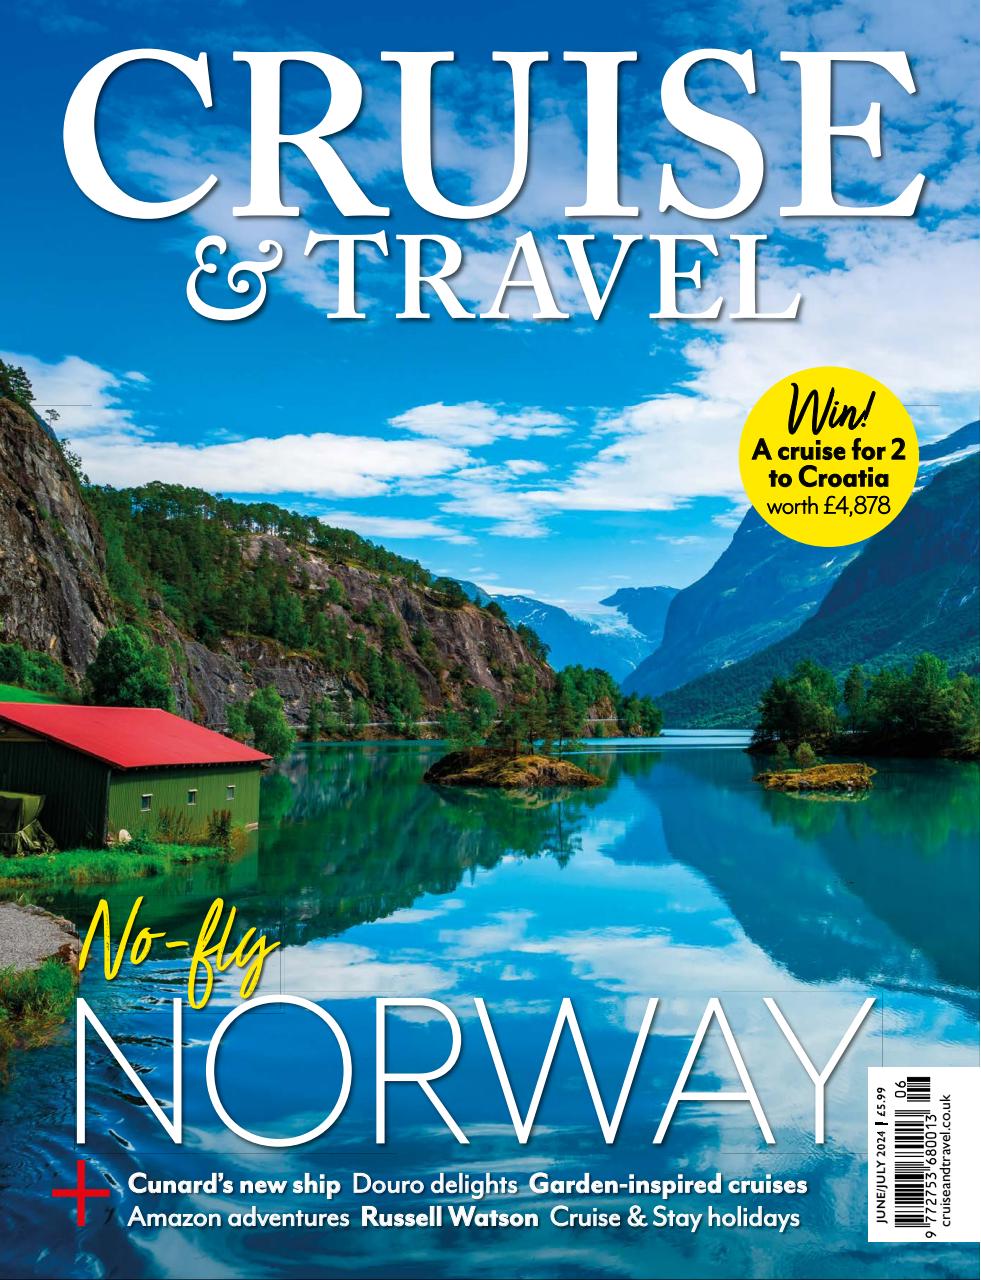 Cruise & Travel Preview Pages